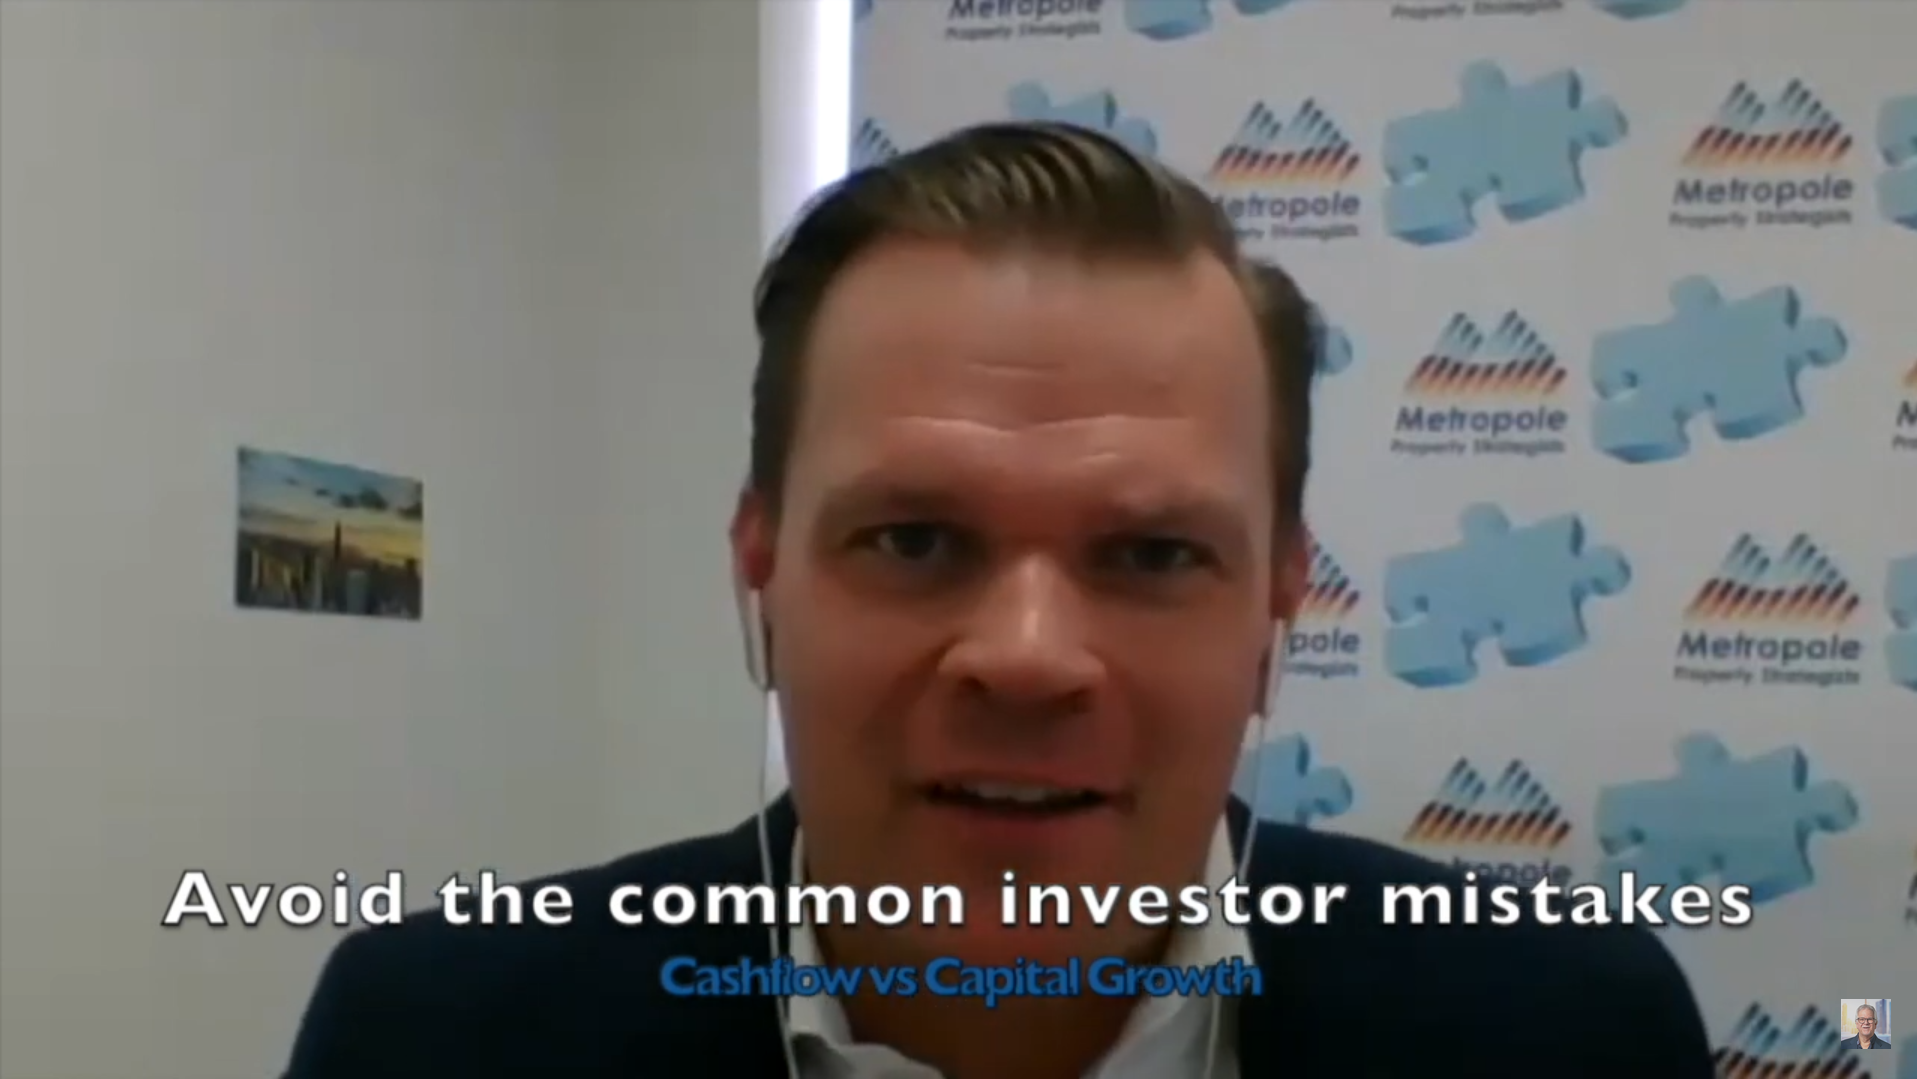 Investing for cash flow rather than capital growth | Common Investor Mistakes